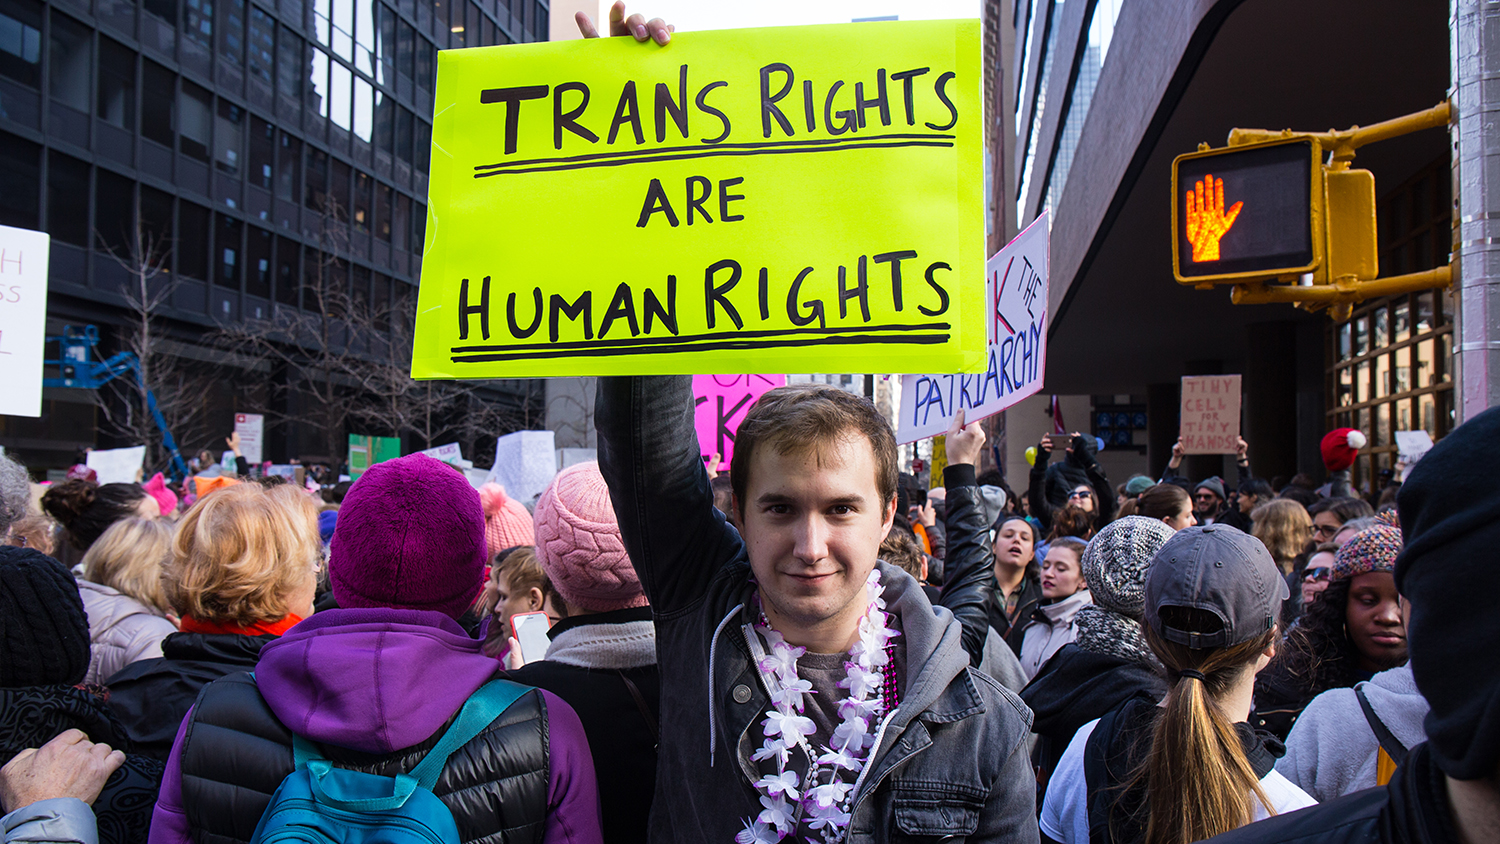 Student holding a sign that reads "Trans Rights are Human Rights"